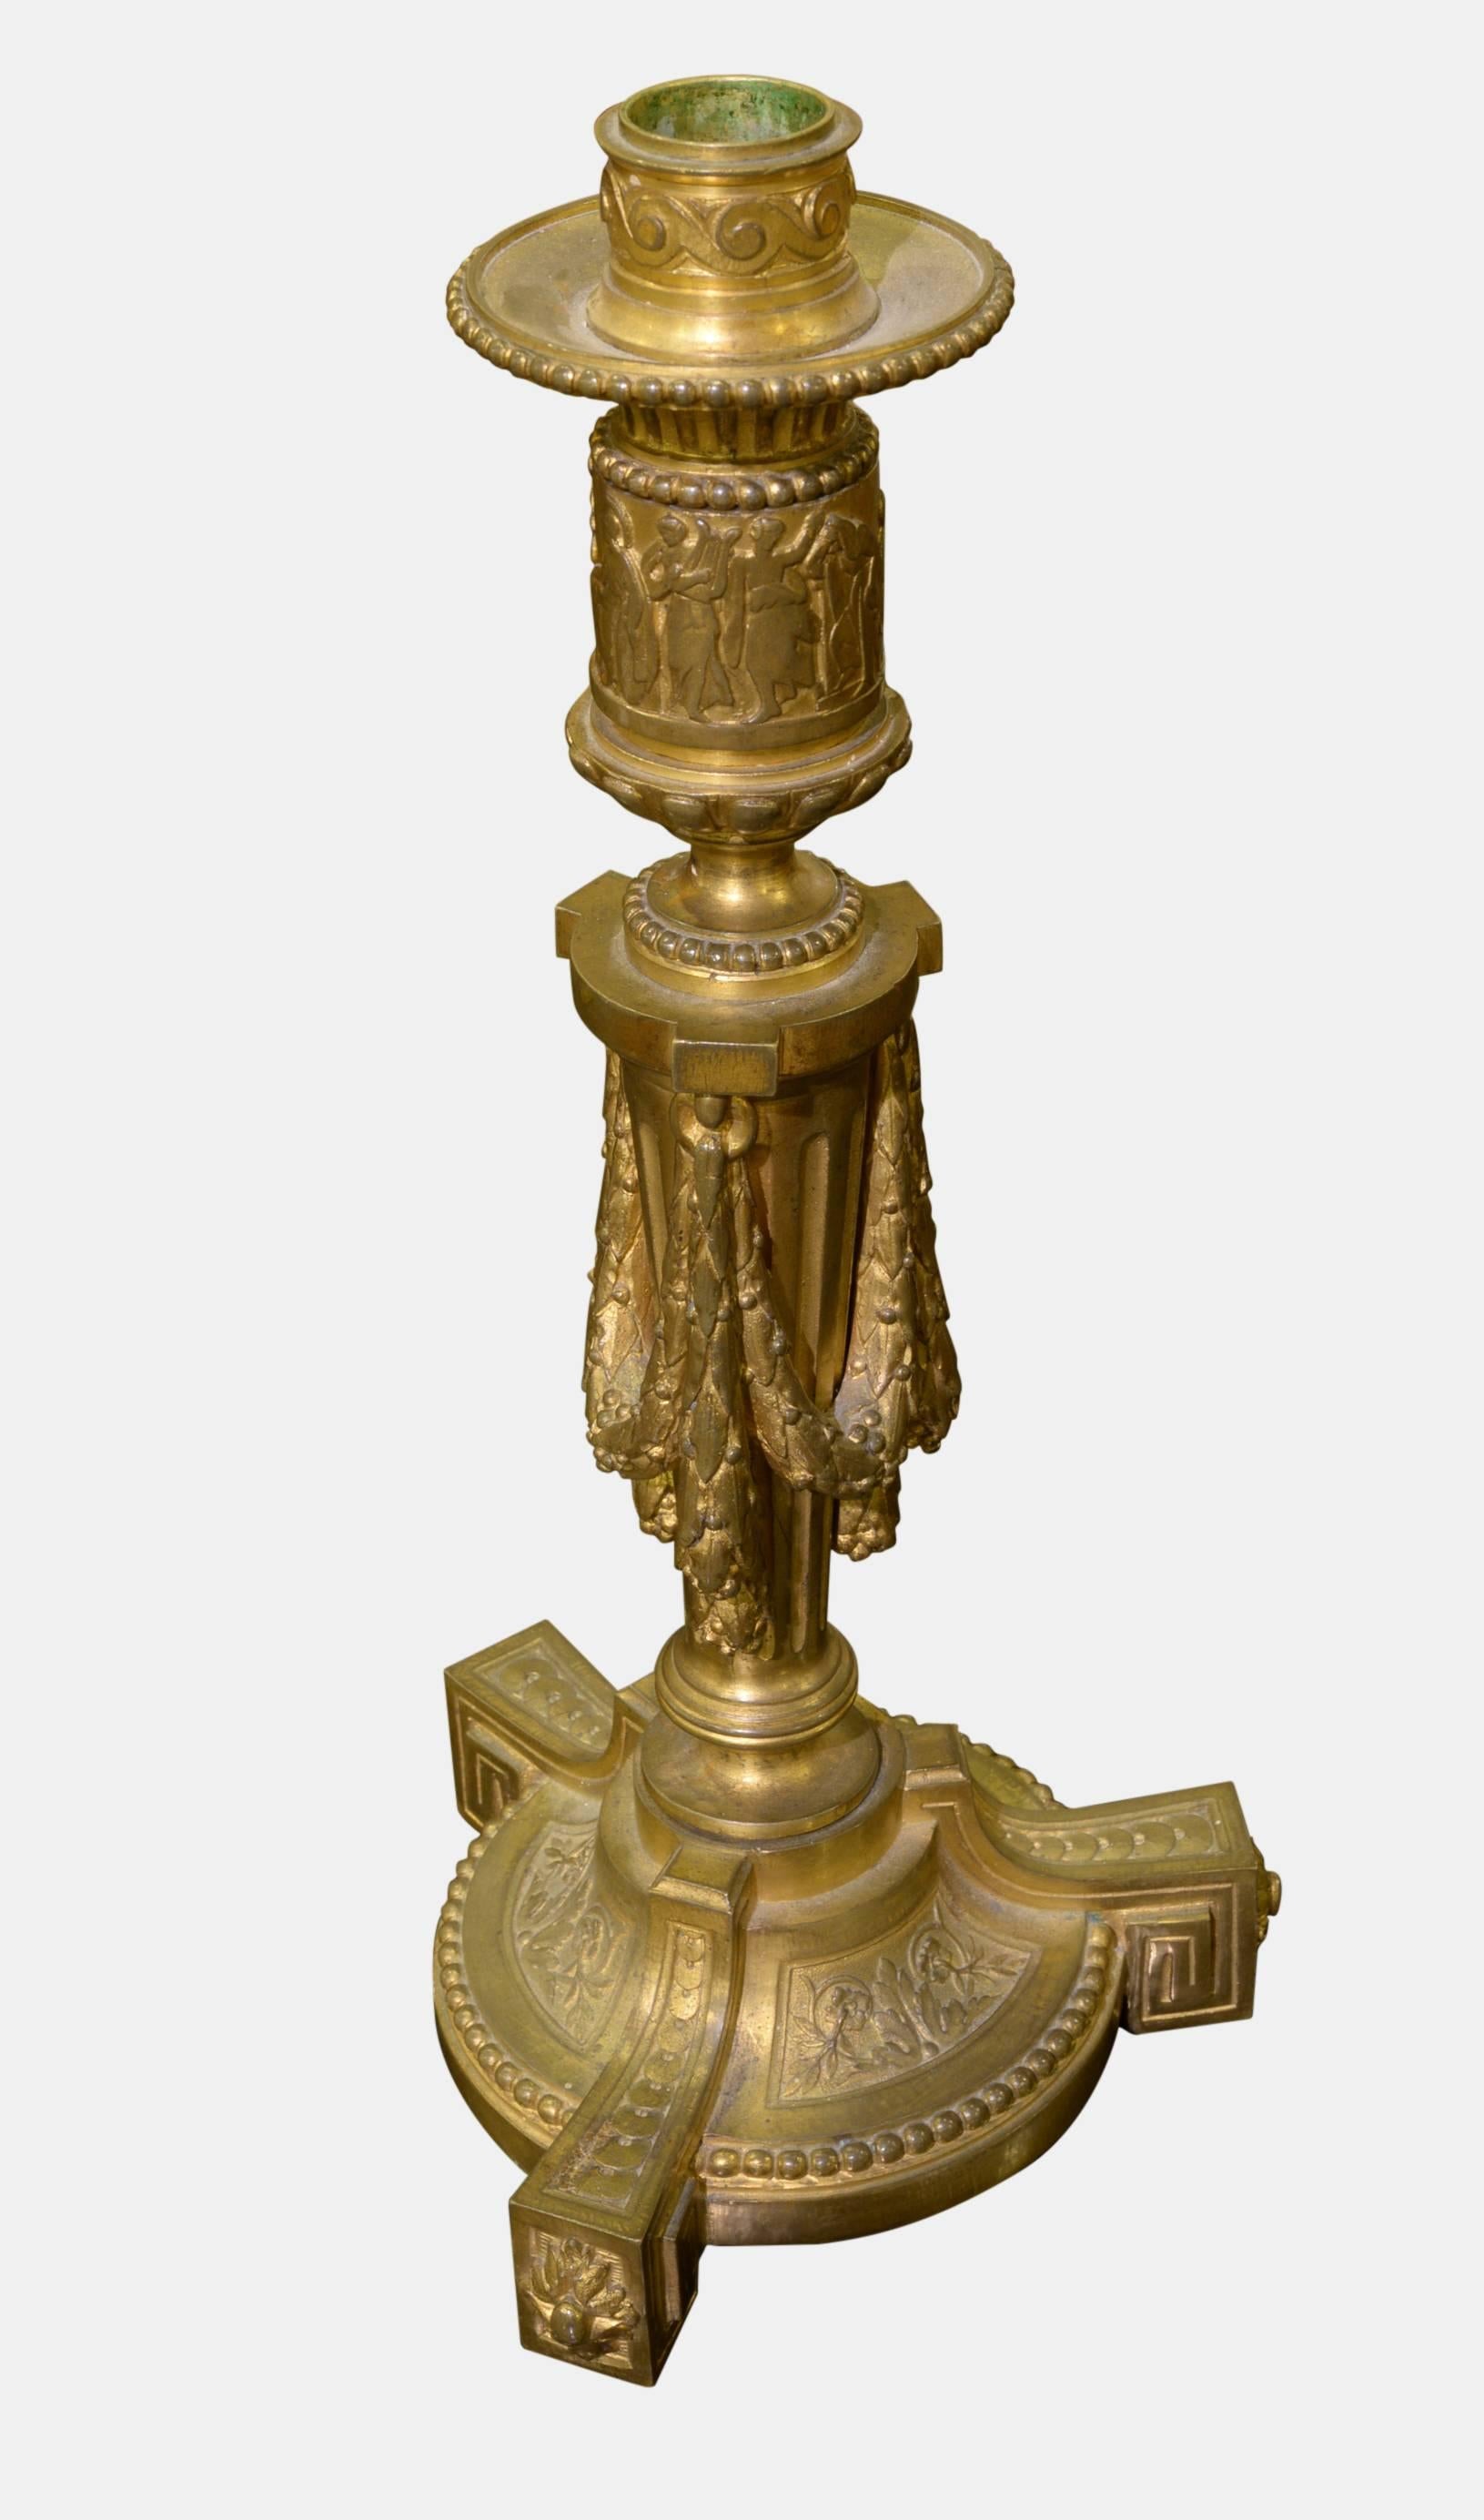 A fine pair of French Louis XVI gilt bronze candlesticks in neoclassical style,

circa 1880.